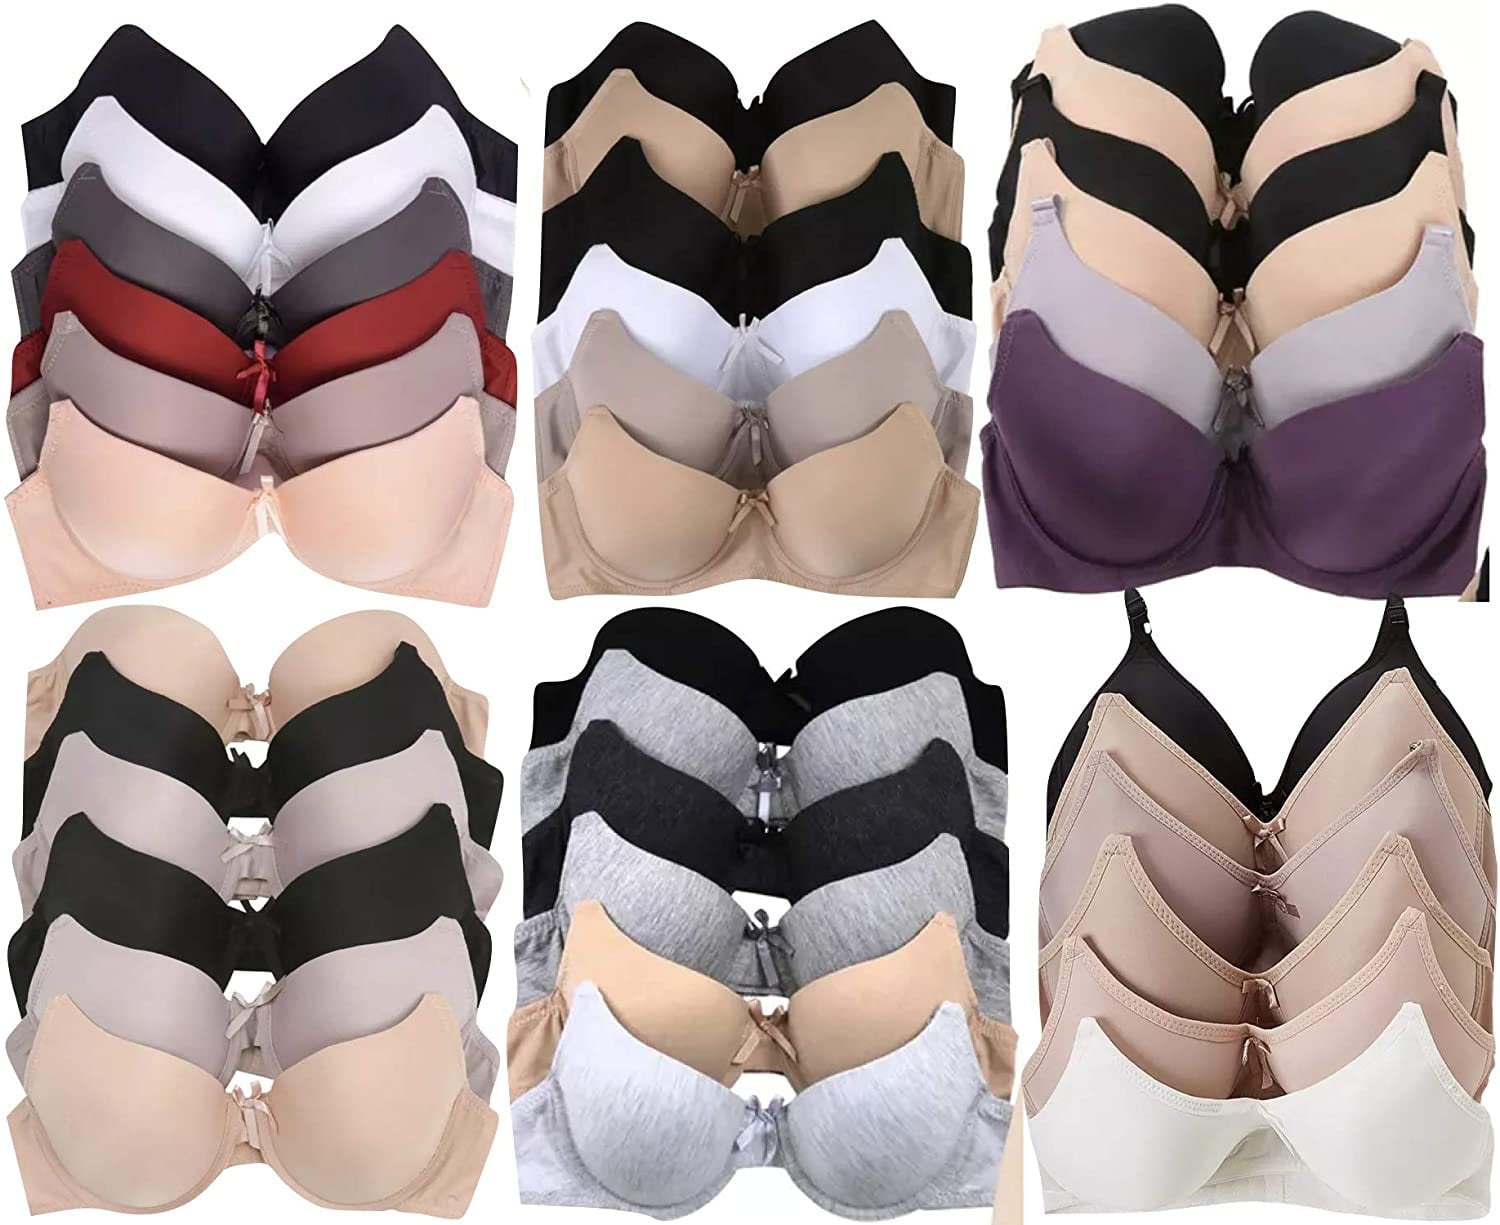 Teenager Bras Soft Padding 6 pack of Cotton Bra A cup, Size 36A (6292)